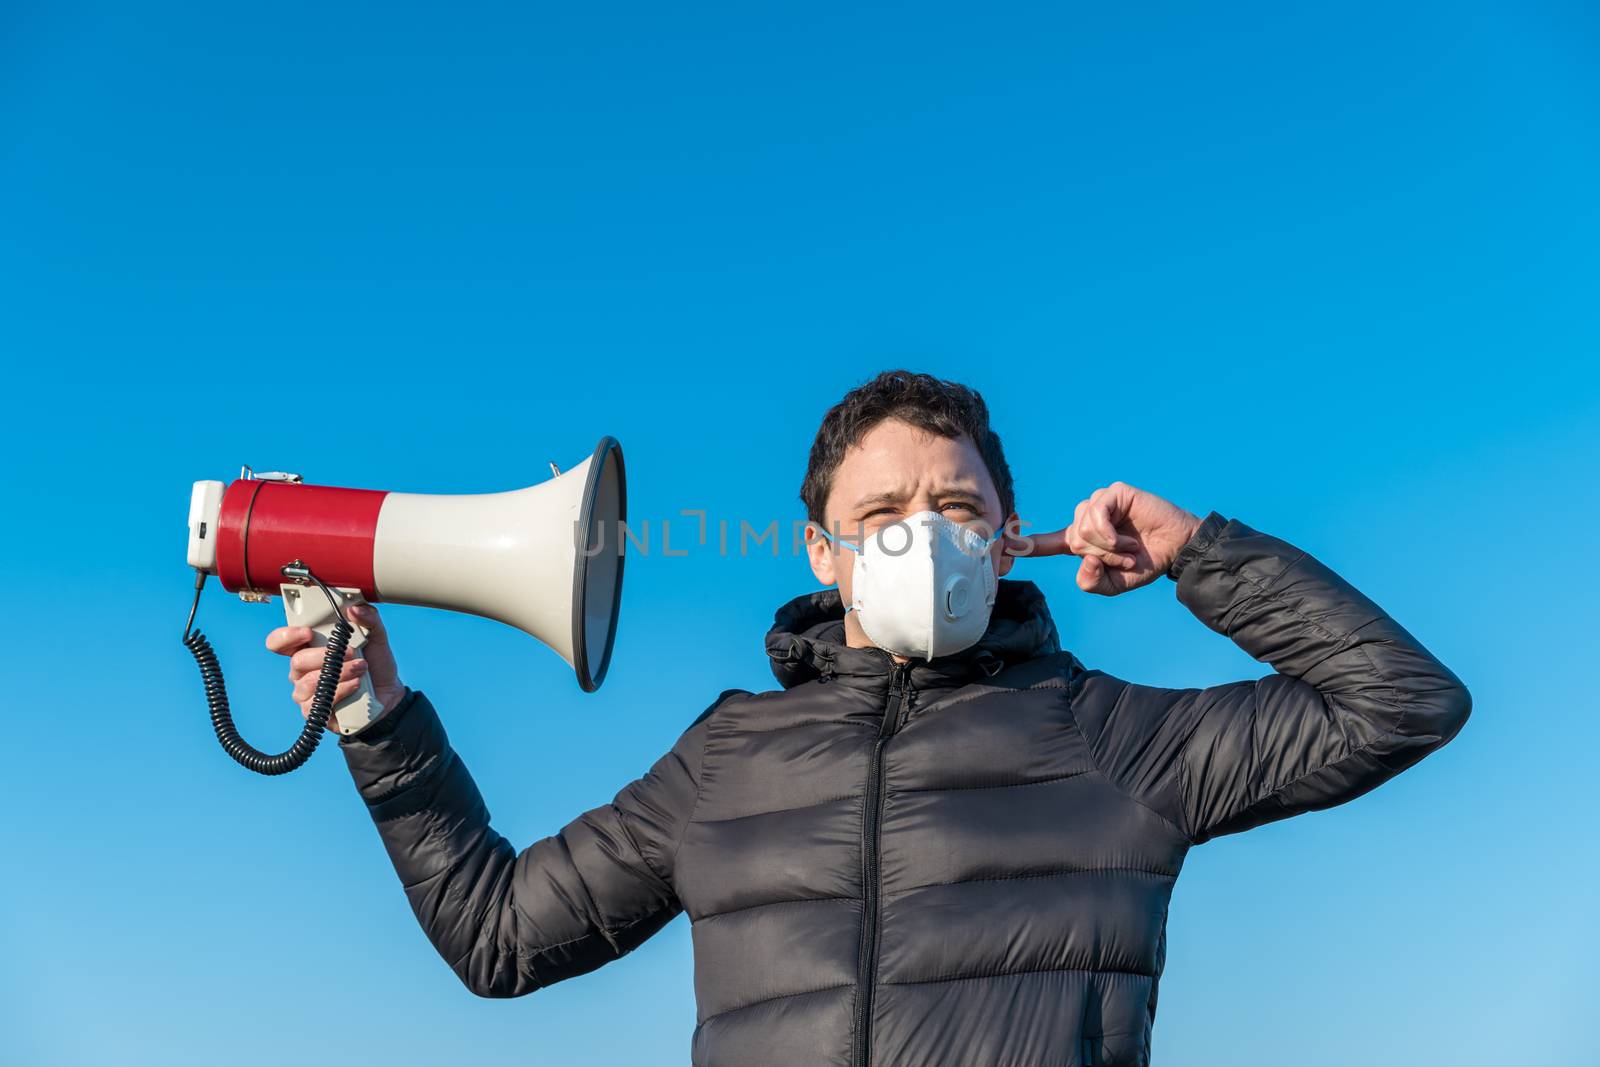 A megaphone as a symbol of spreading a huge amount of coronavirus information. Respirator protection and information filtering.